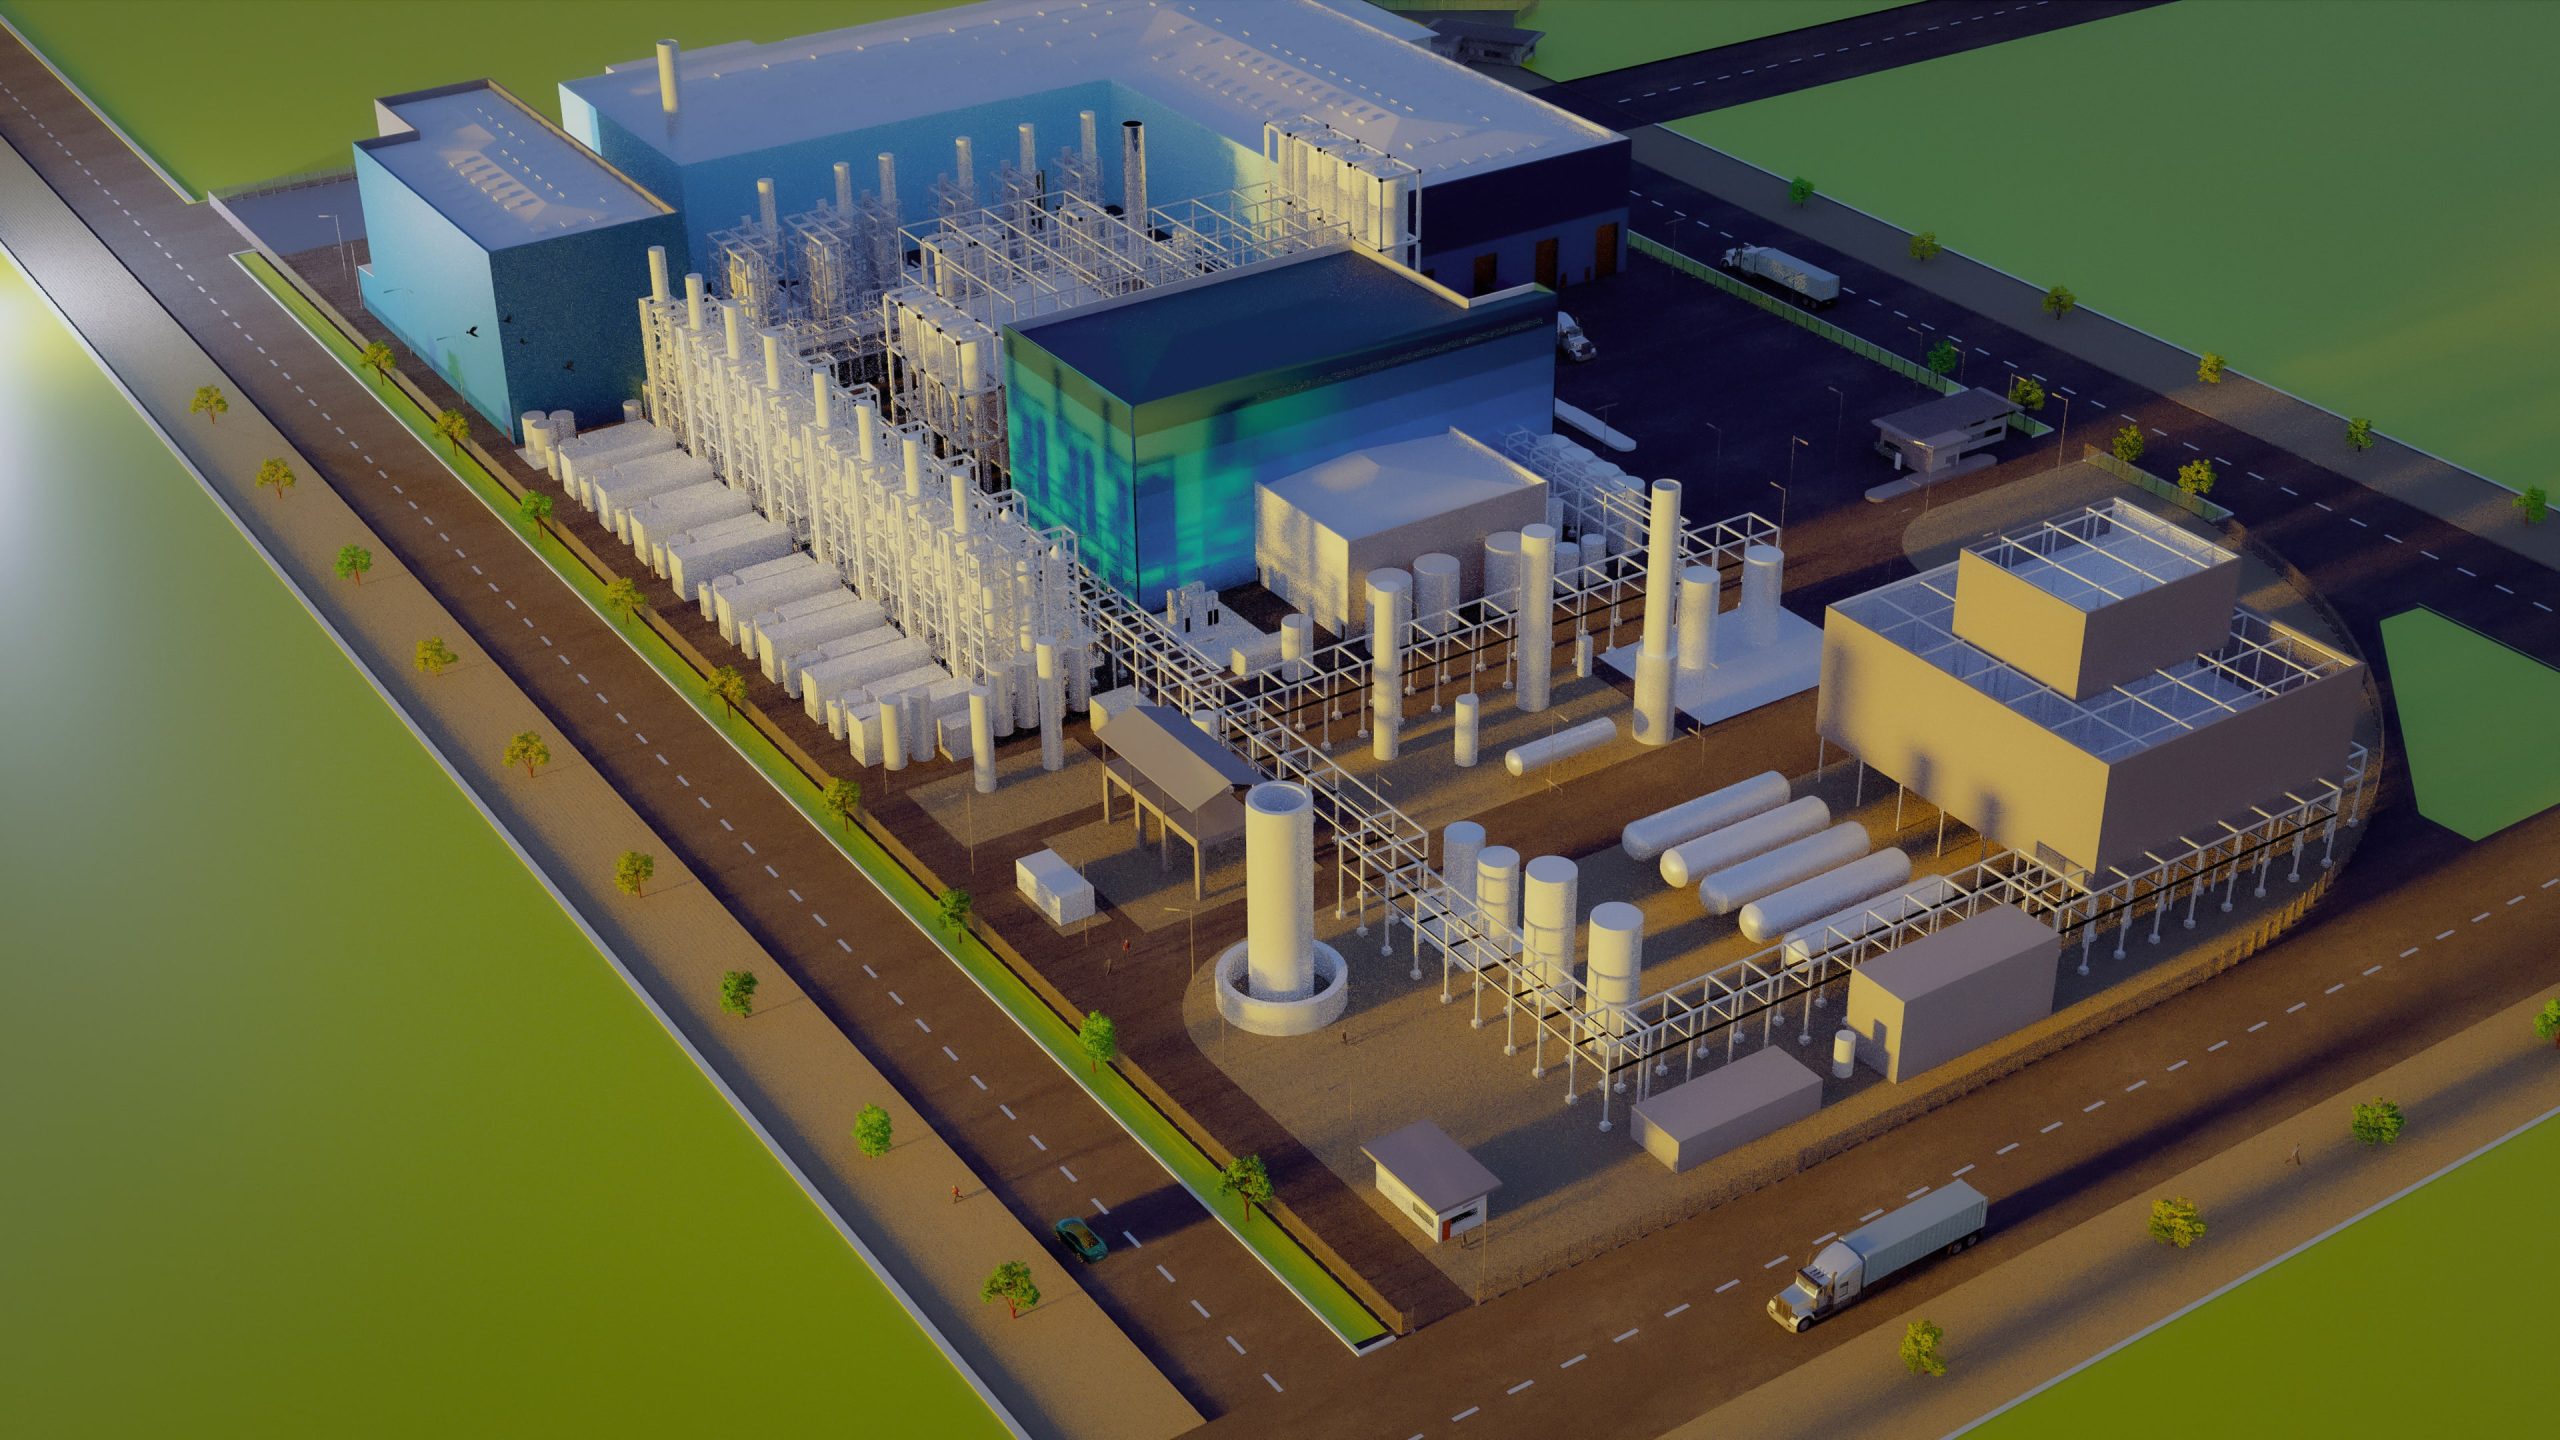 UK’s First Waste-to-DME Plant One Step Closer To Construction as Planning Permission Submitted